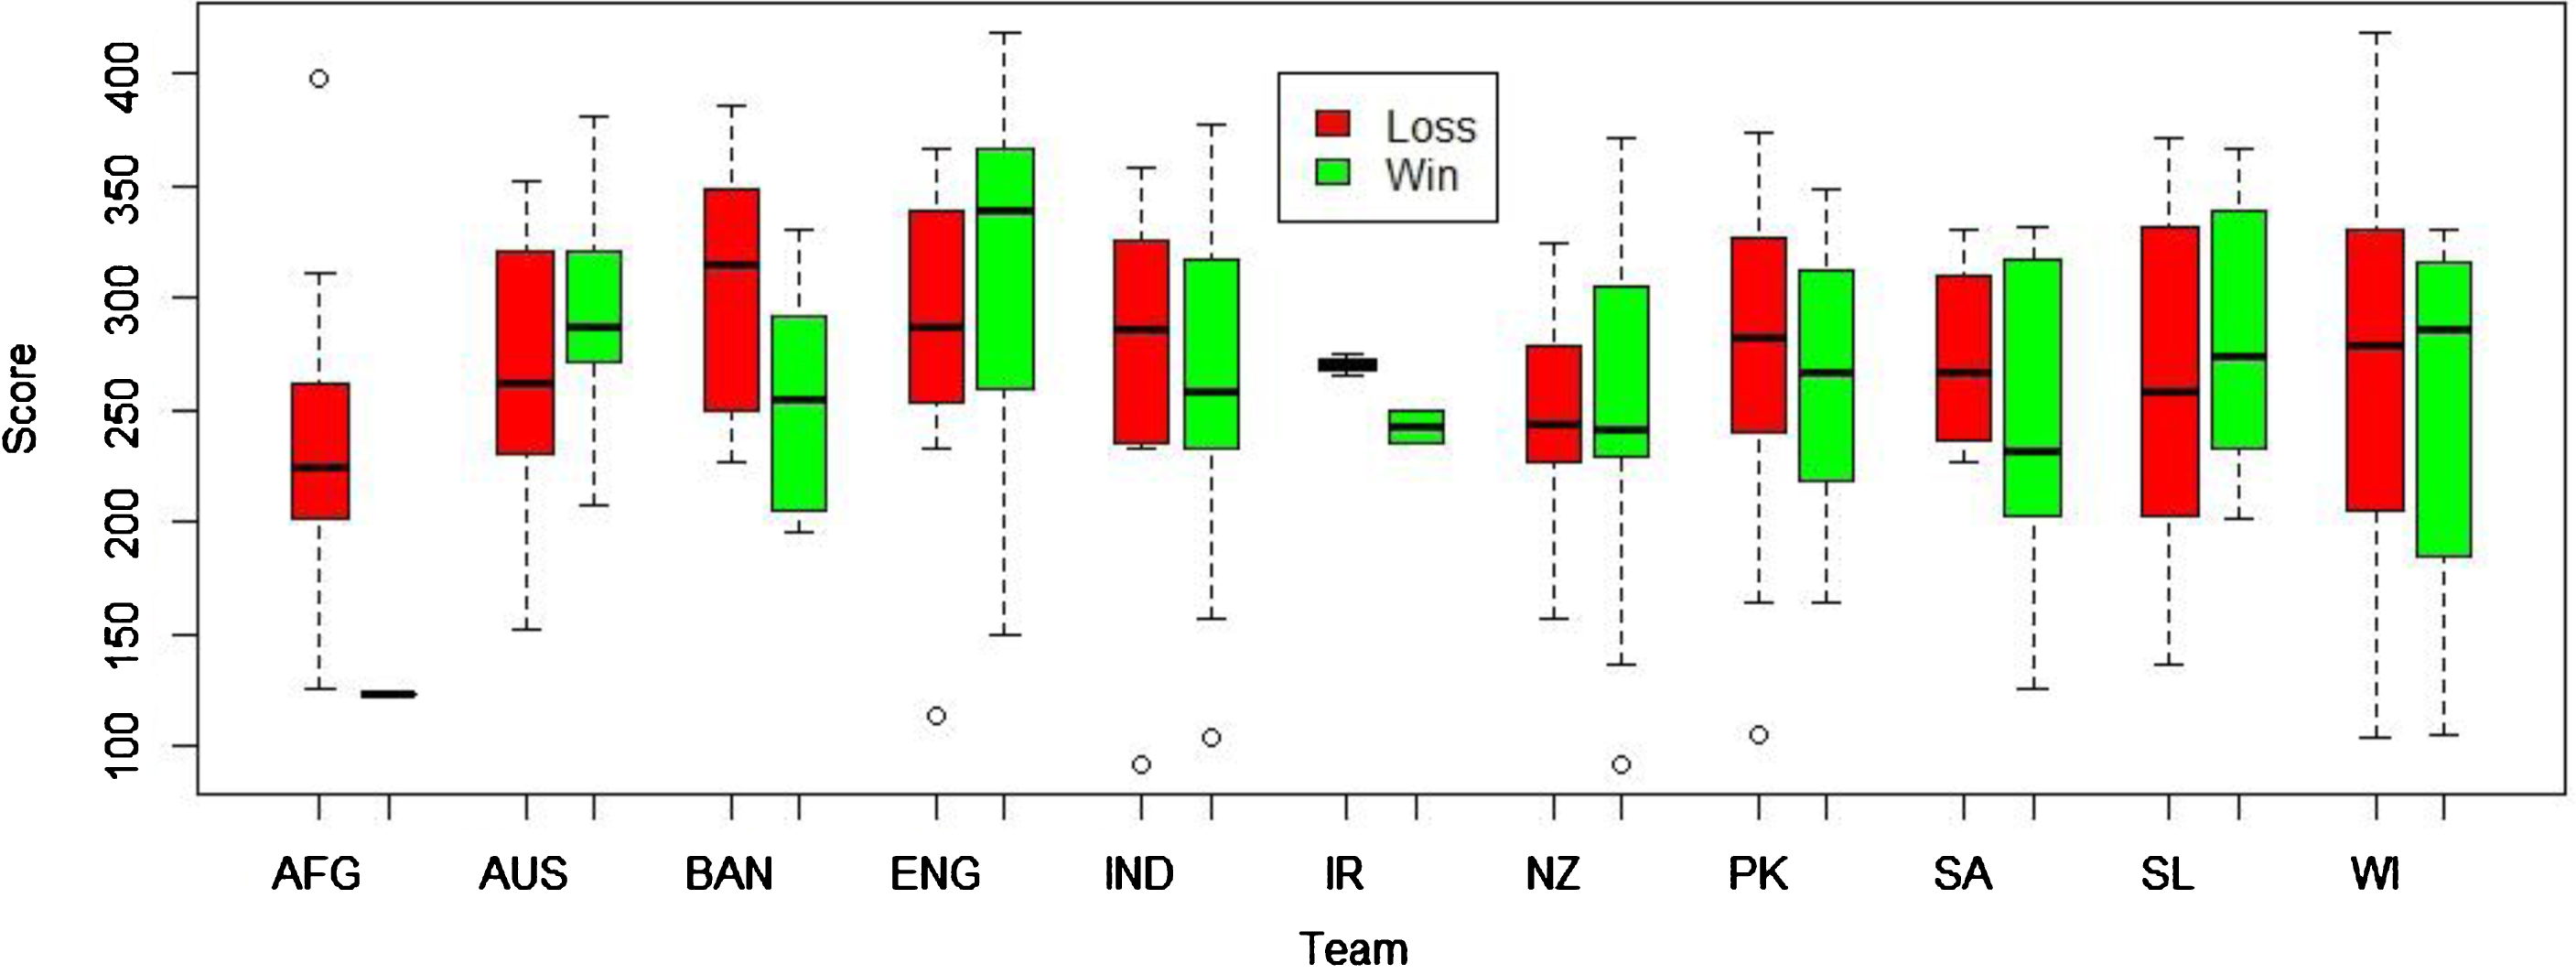 Distribution of scores for winning and losing games.